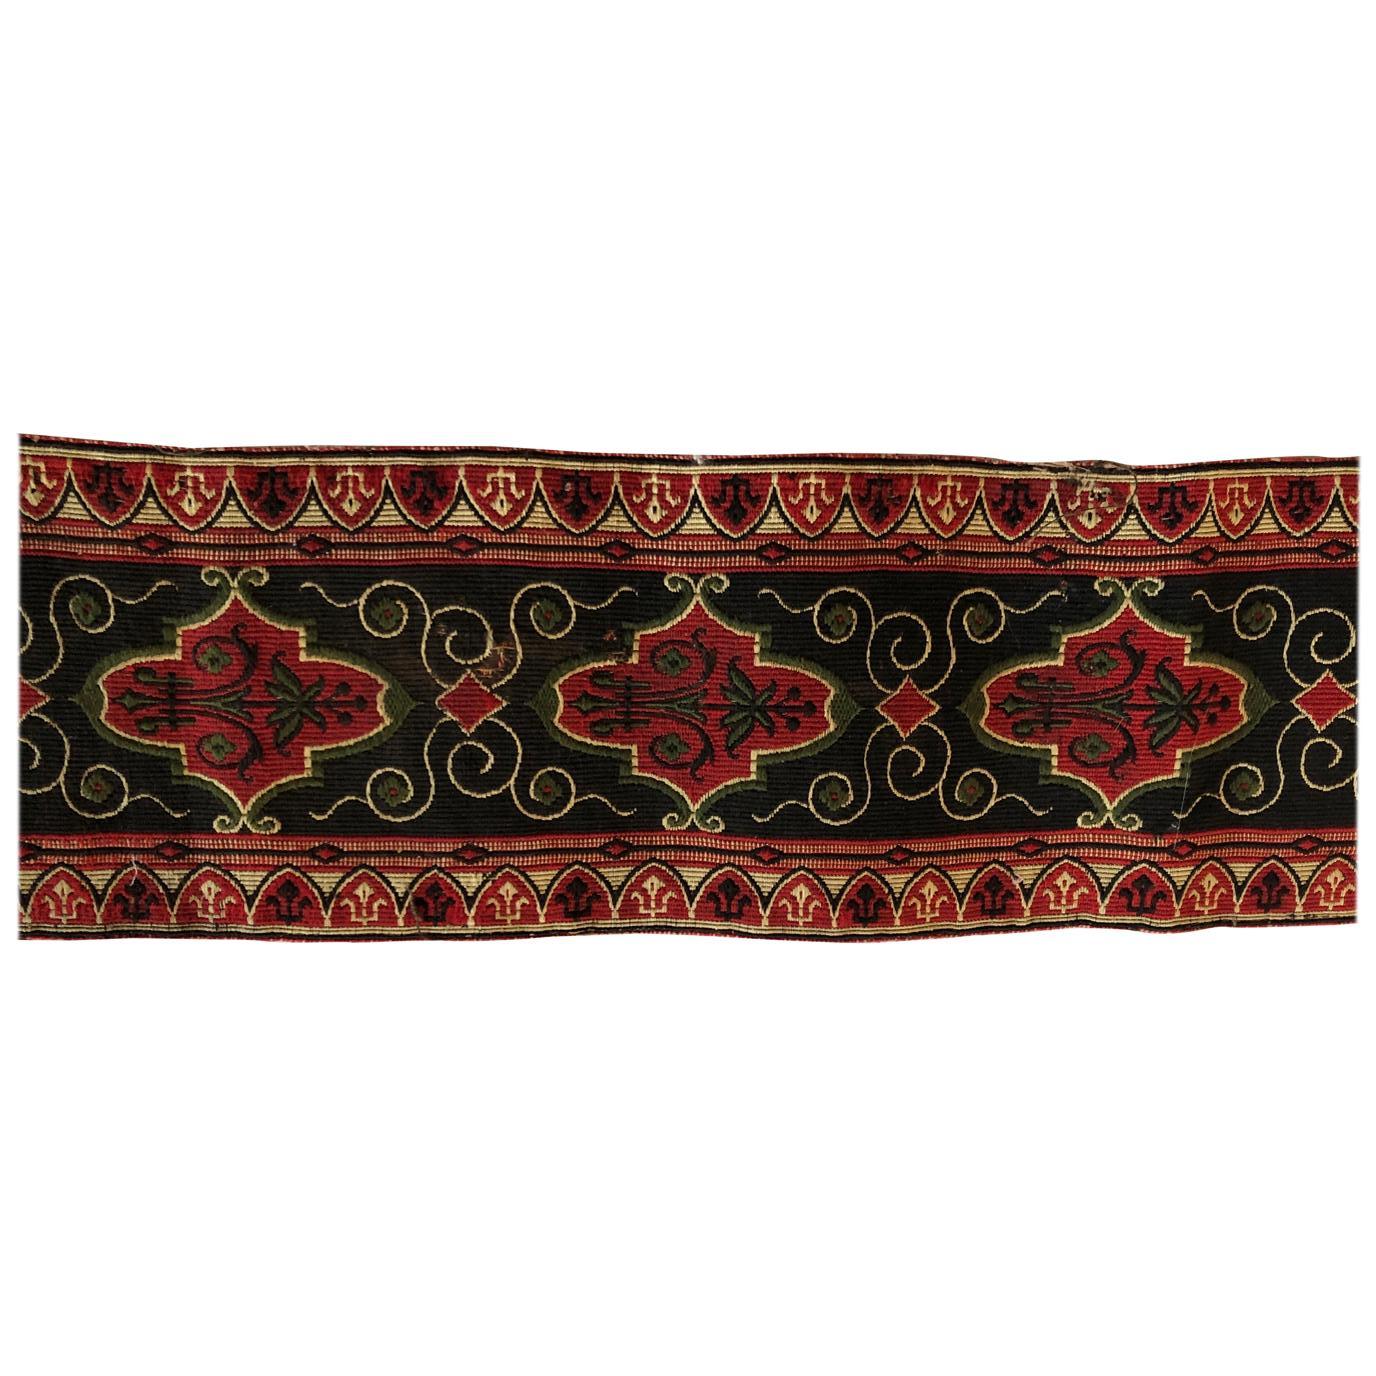 Antique Red and Black Woven Tapestry Style Trim